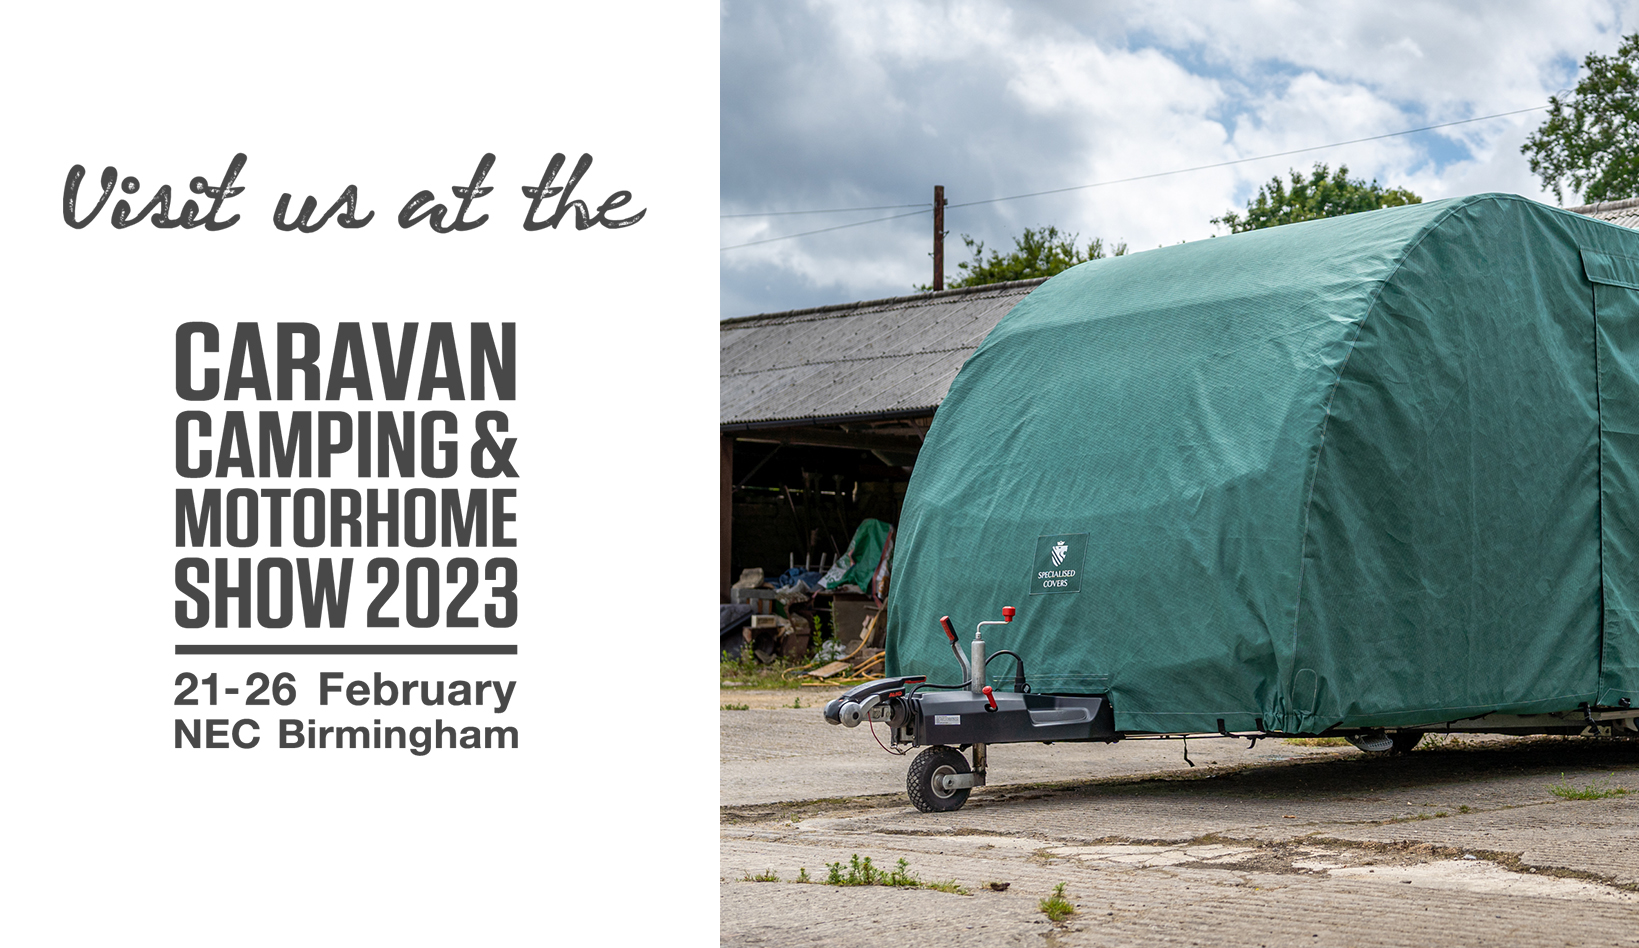 Click to read Visit us at the Feb NEC Caravan Camping & Motorhome Show 2023 Hall 2 Stand 2224